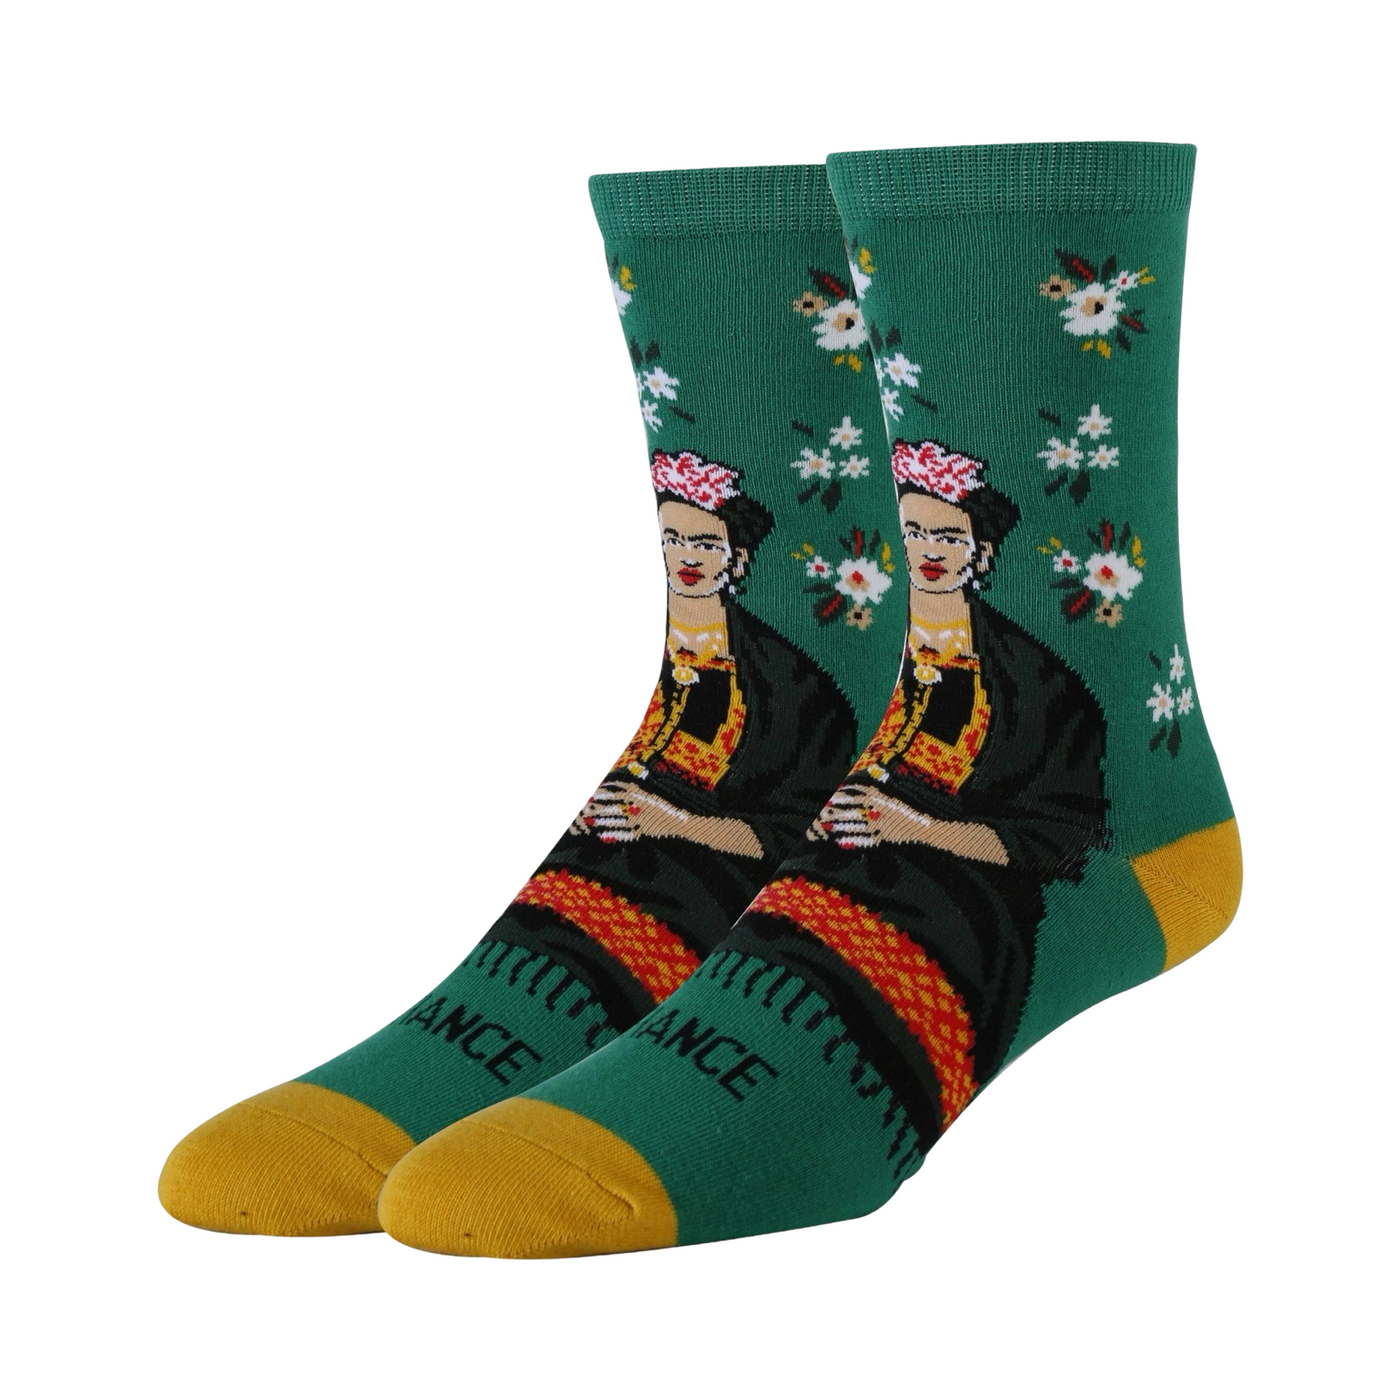 Pair of green socks with yellow block on toes and heel featuring an image of Frida Kahlo surrounded by white flowers.